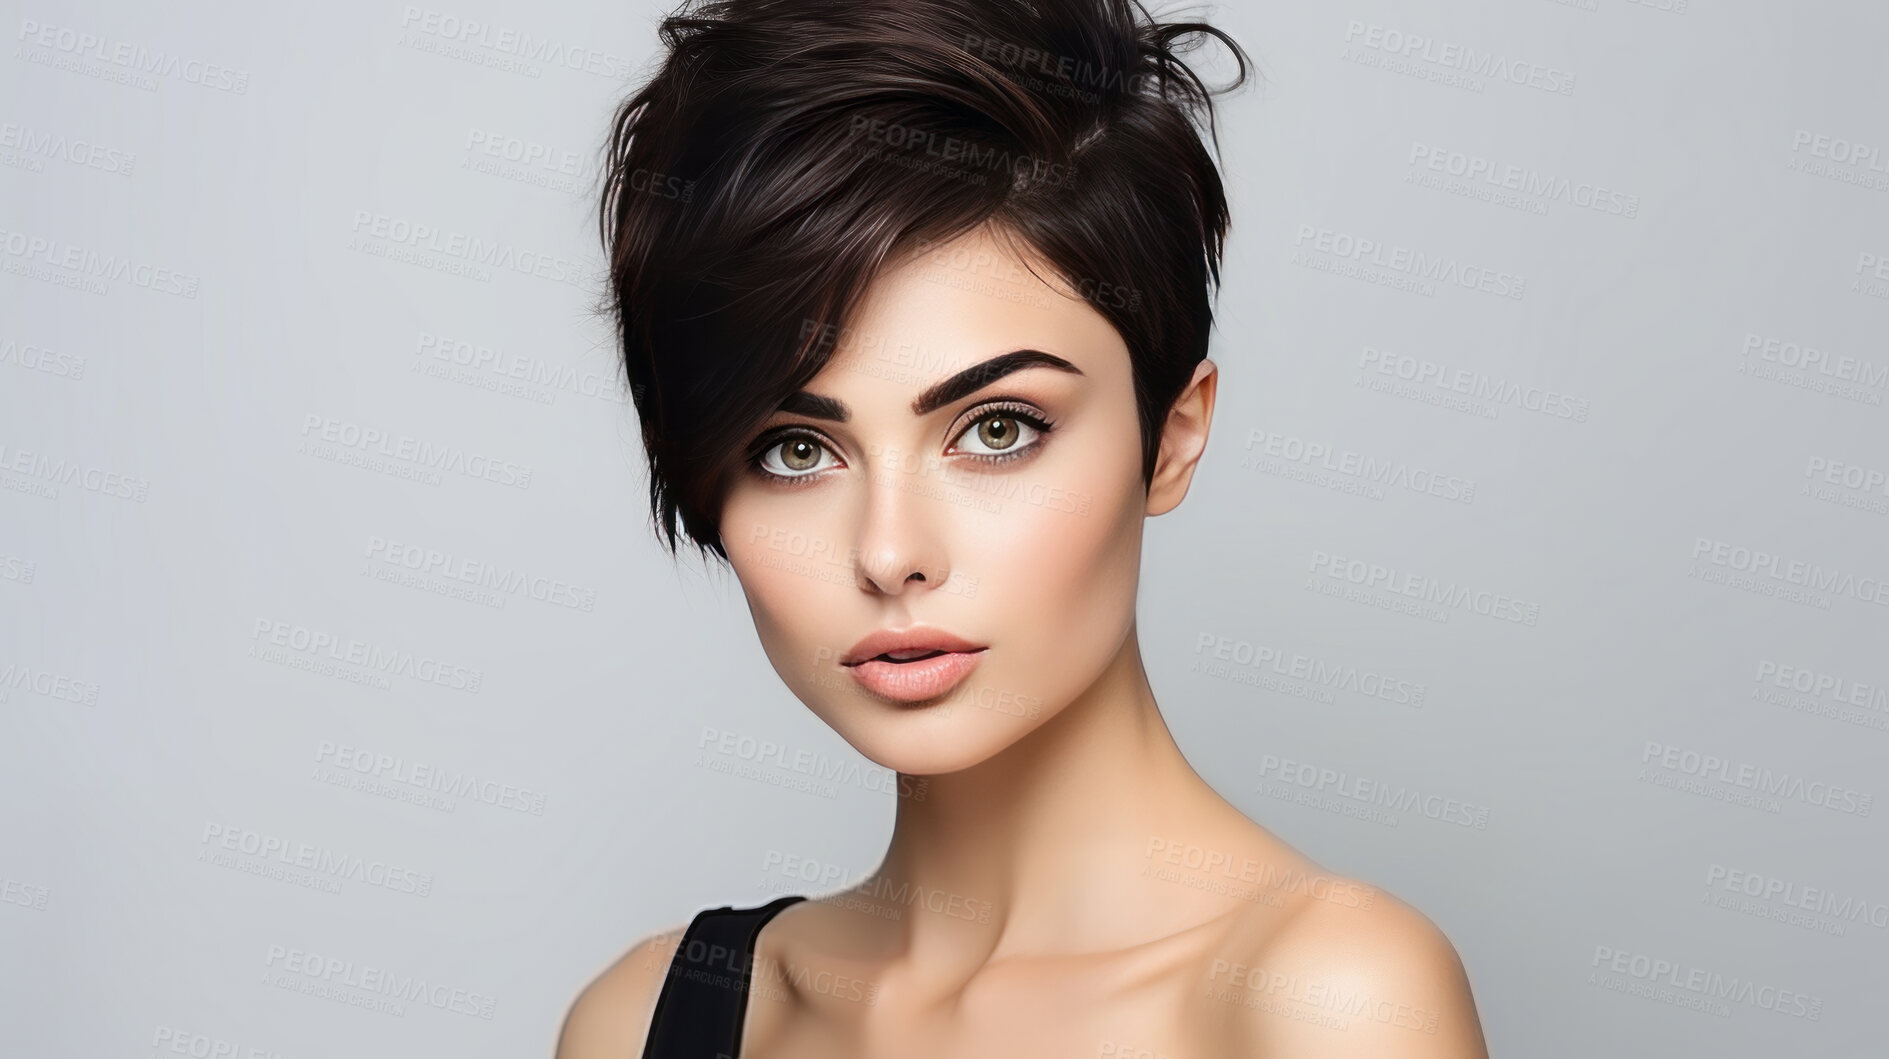 Buy stock photo Portrait of young woman with short dark pixie haircut. Hair care, make-up and hair health